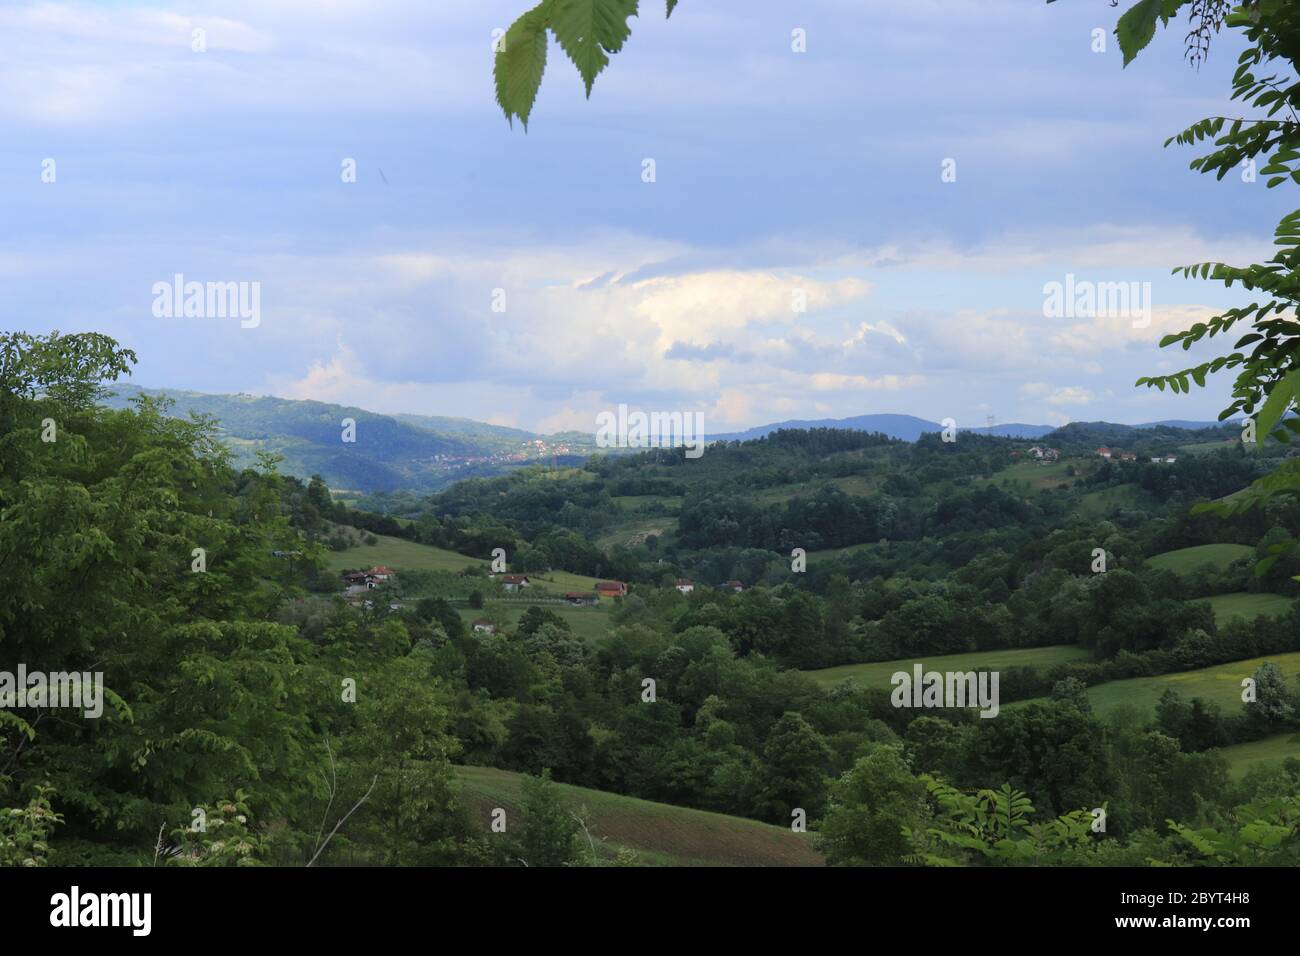 Dramatic spring mountain landscape of a beautiful green forest where small mountain villages can be seen in the distance located in unusually quiet Stock Photo